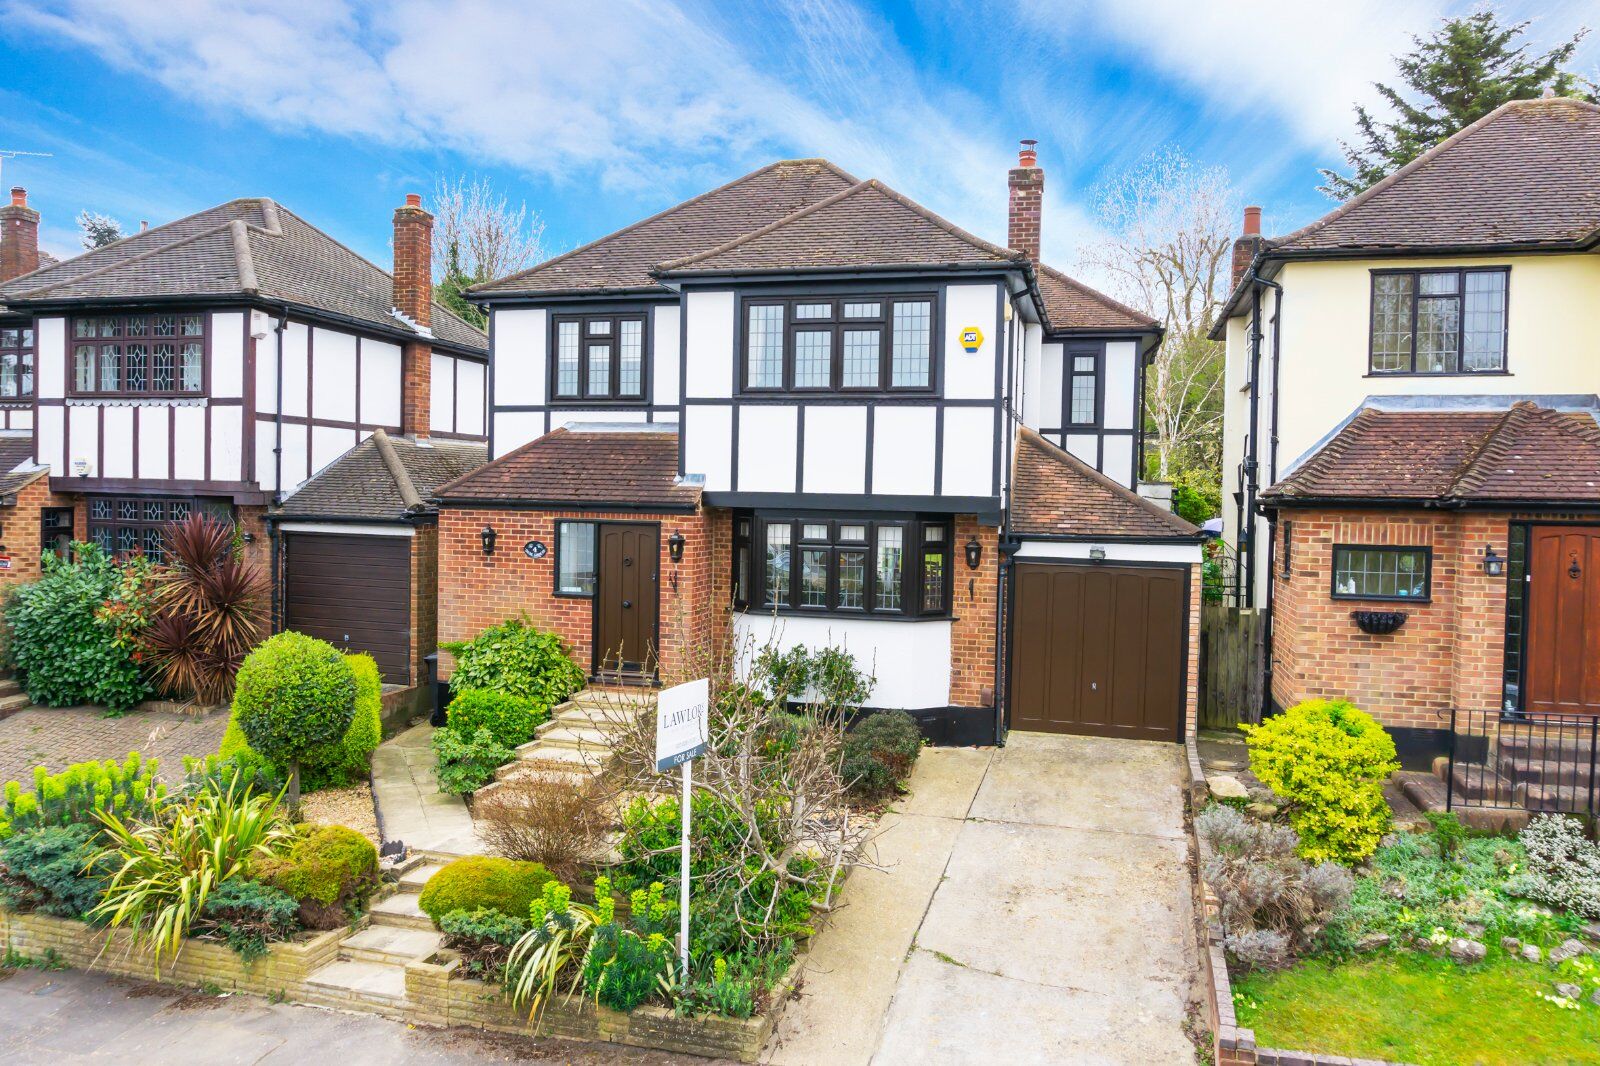 3 bedroom detached house for sale Dacre Gardens, Chigwell, IG7, main image